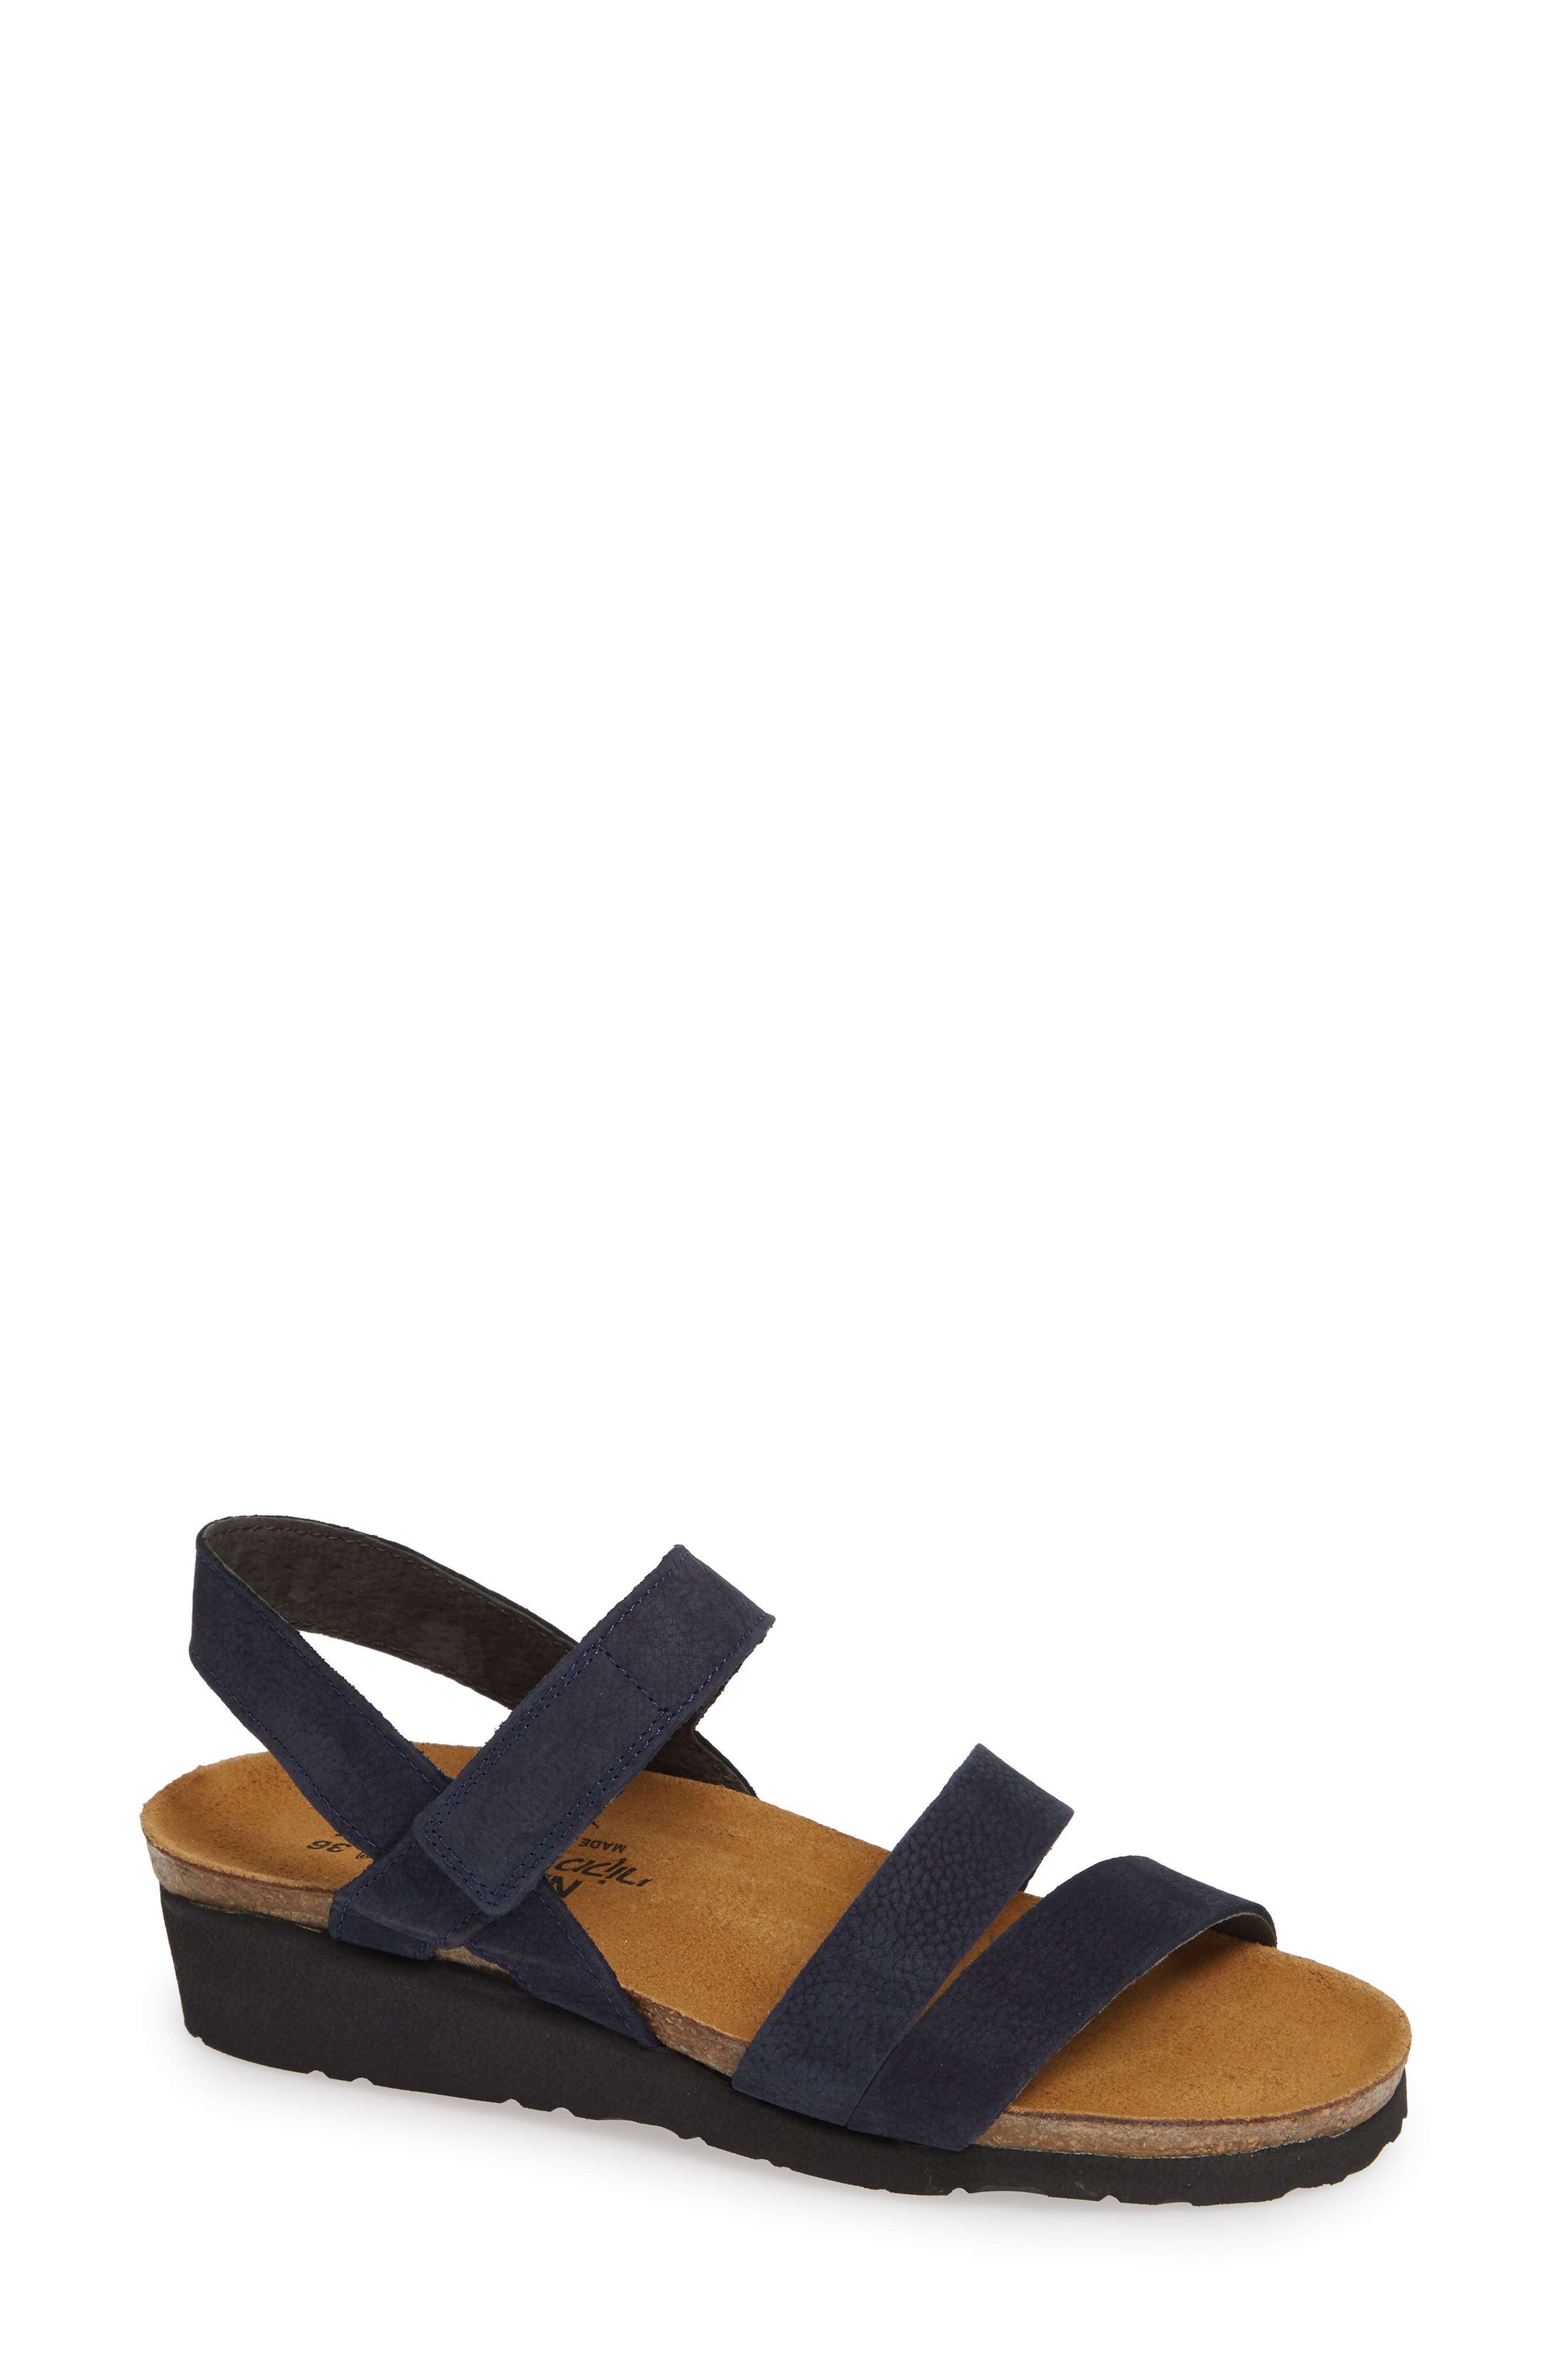 naot sandals on sale